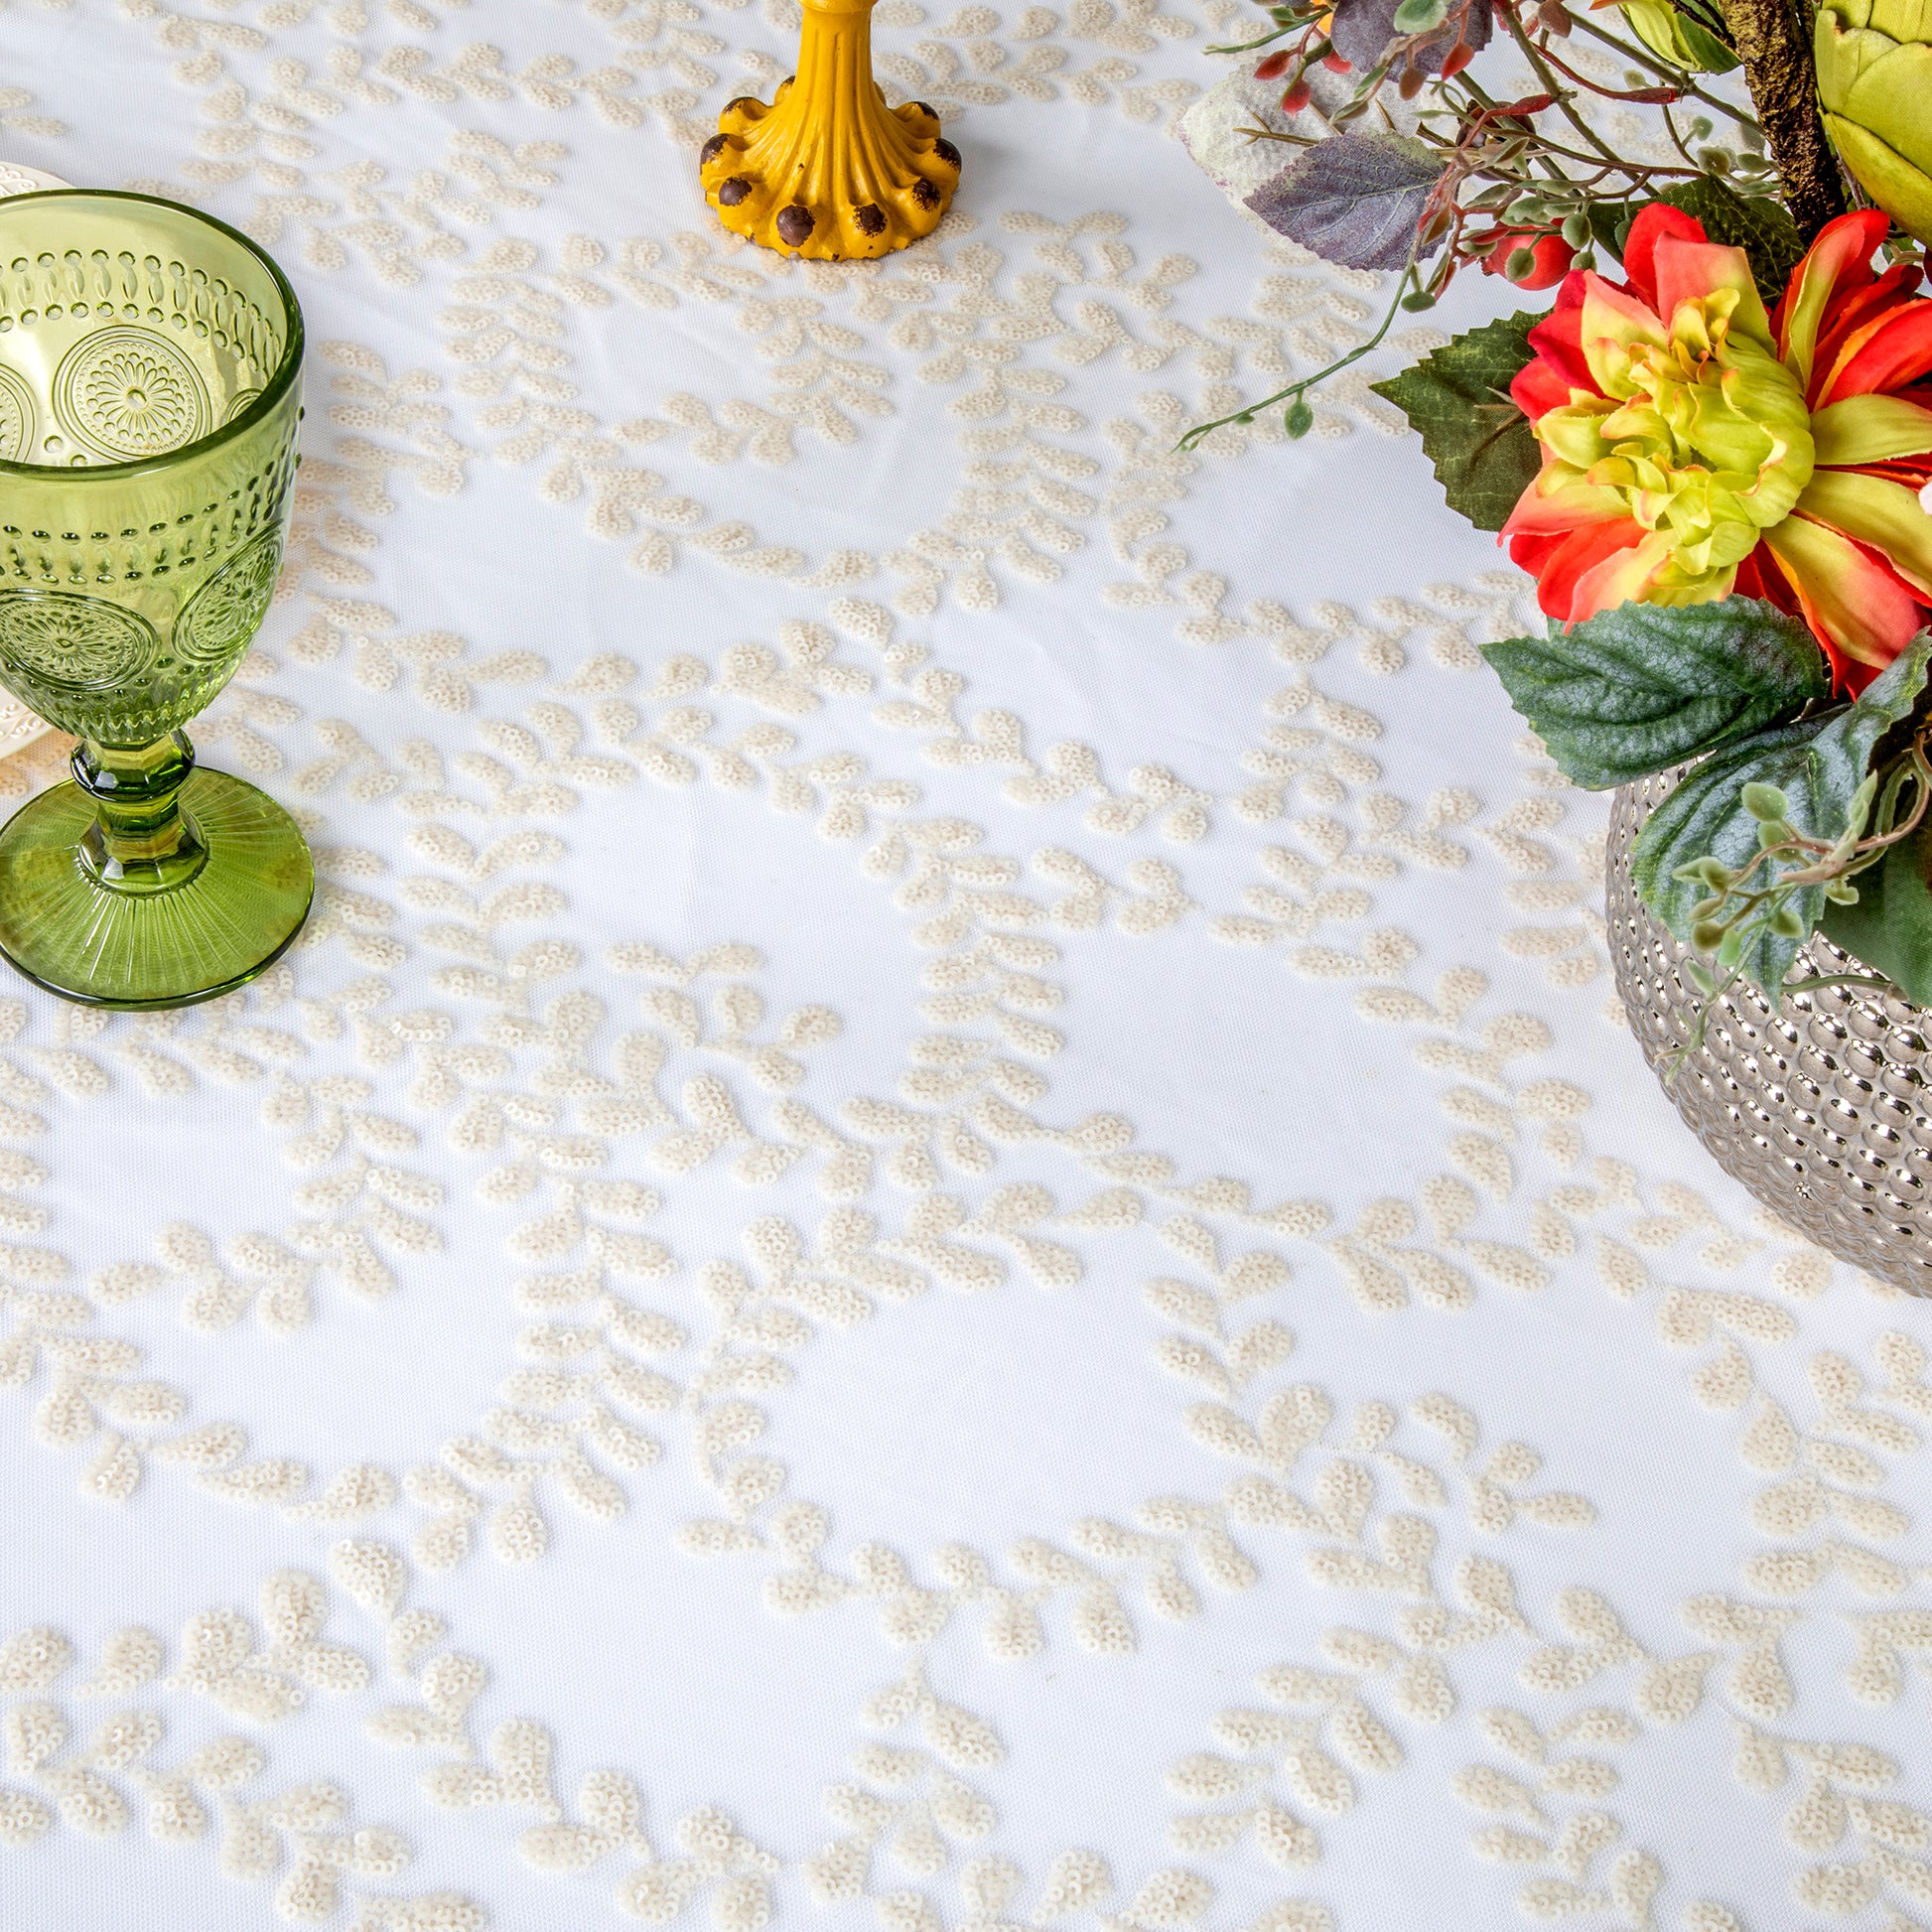 Sequin Vine Tablecloth Overlay 90"x132" Rectangle - Light Ivory/Off White